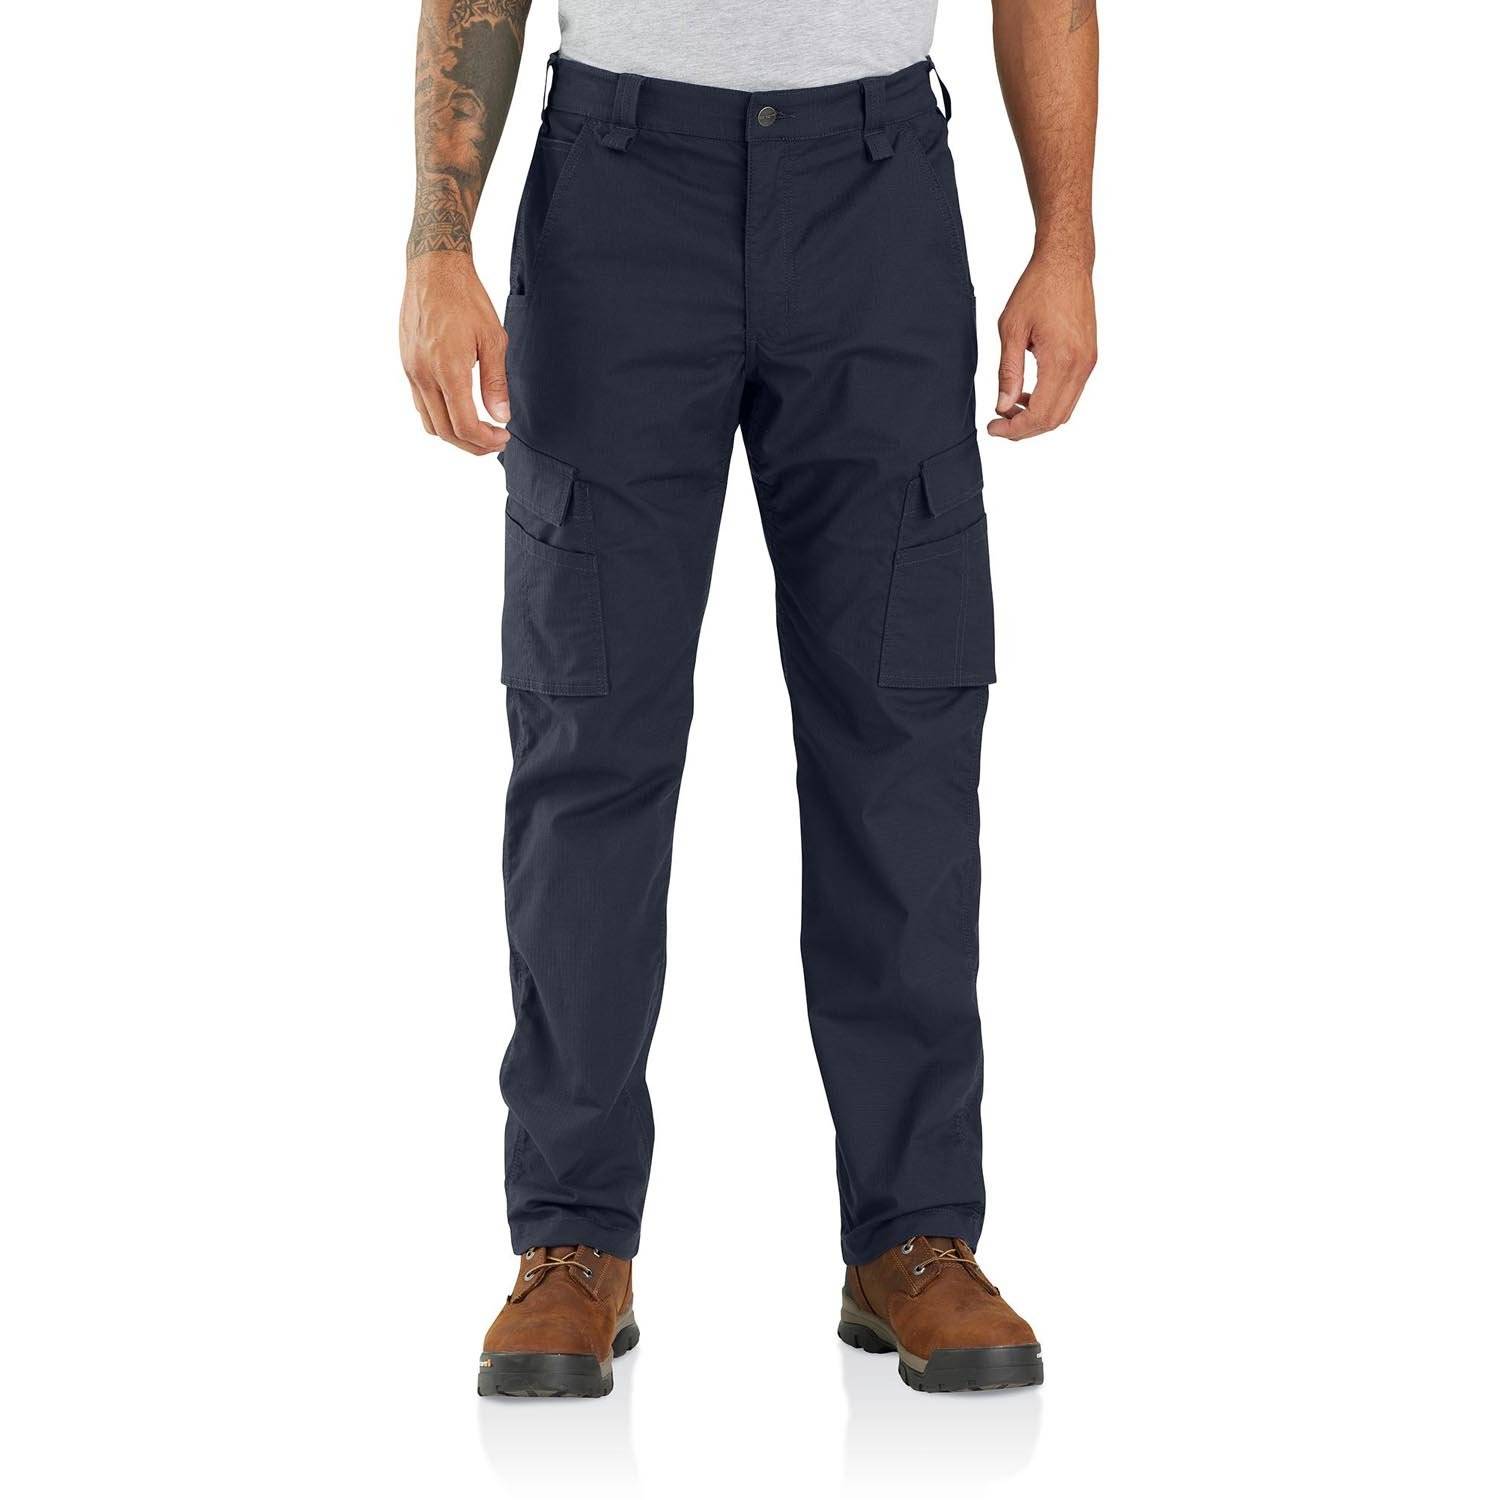 Carhartt Force Relaxed Fit Ripstop Cargo Work Pants.